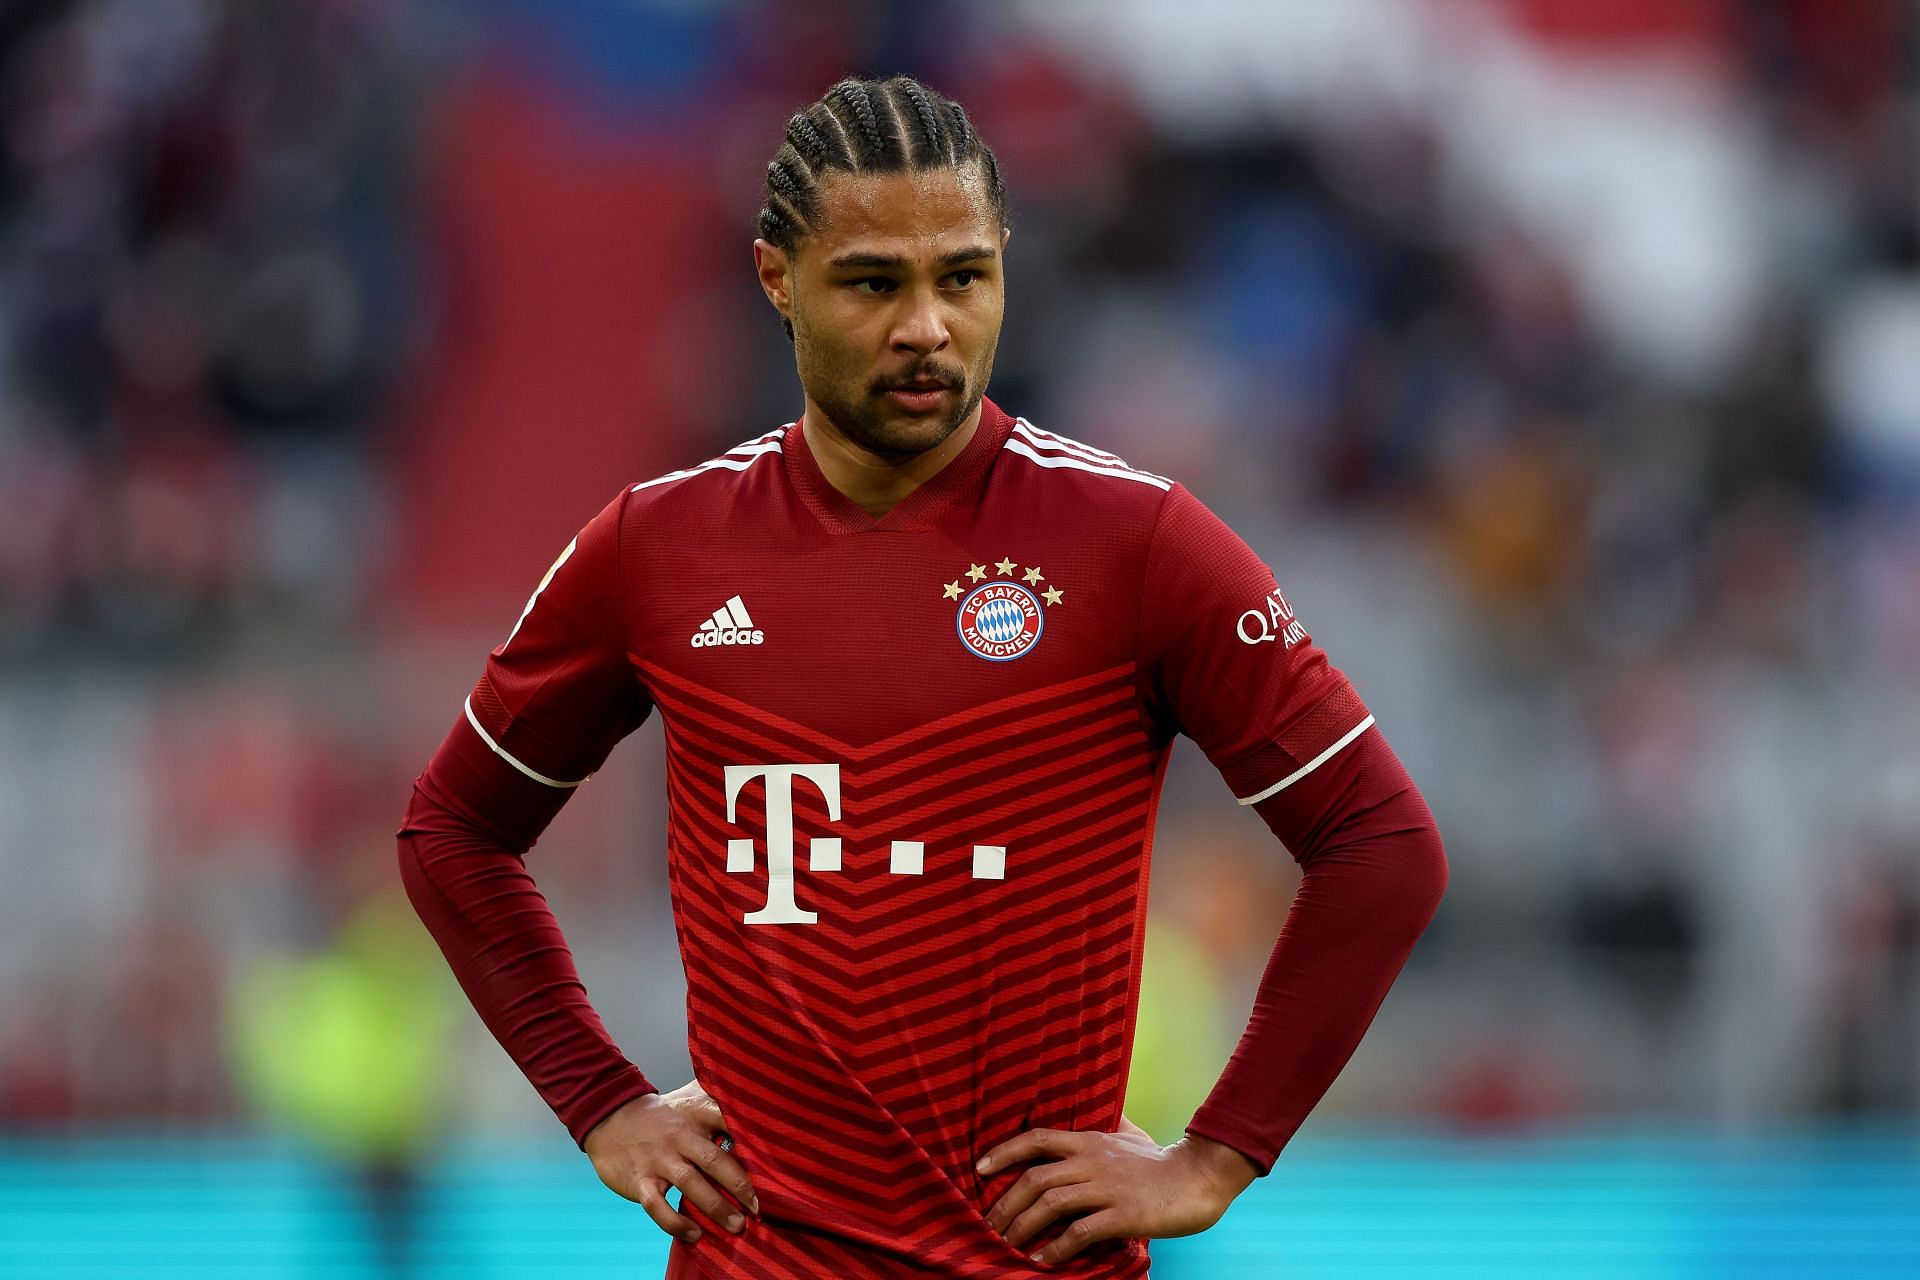 Gnabry is wanted back at his old football club by Arsenal fans